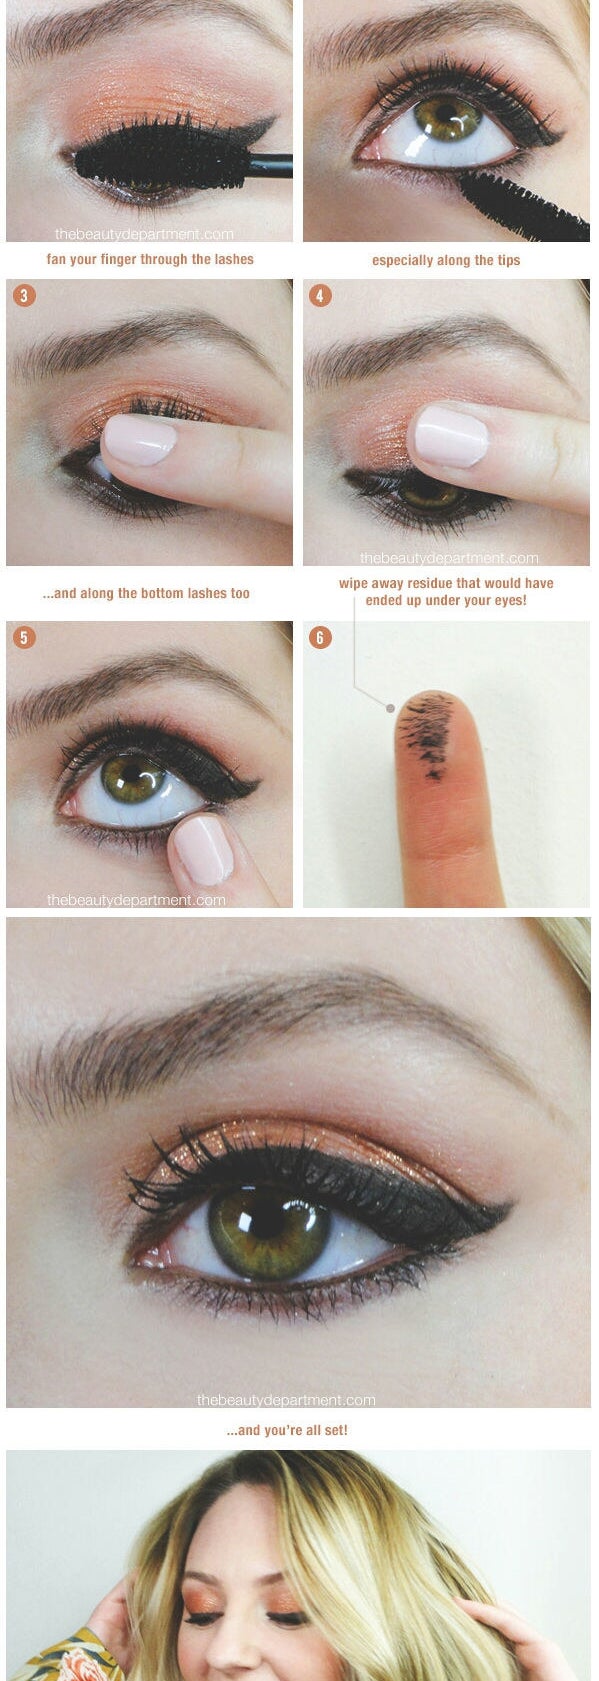 A diagram showing how to do the trick, with a model simply running their fingers along the lower side of the top lashes after applying mascara